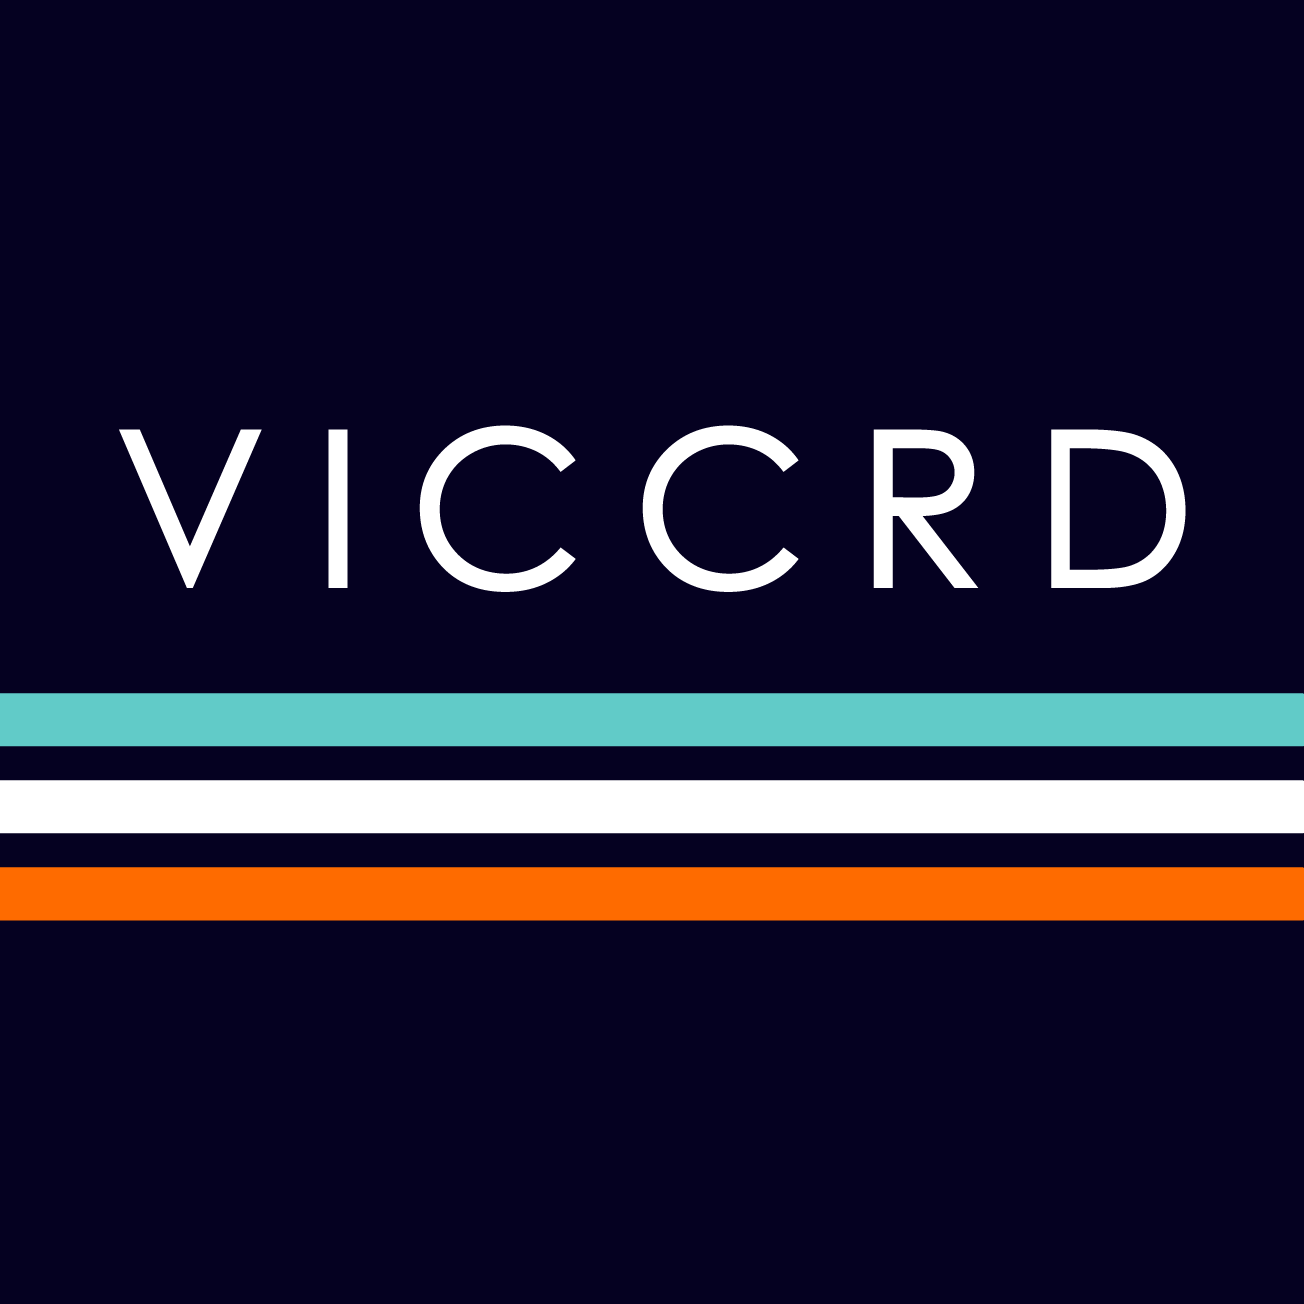 Club Image for VICCRD